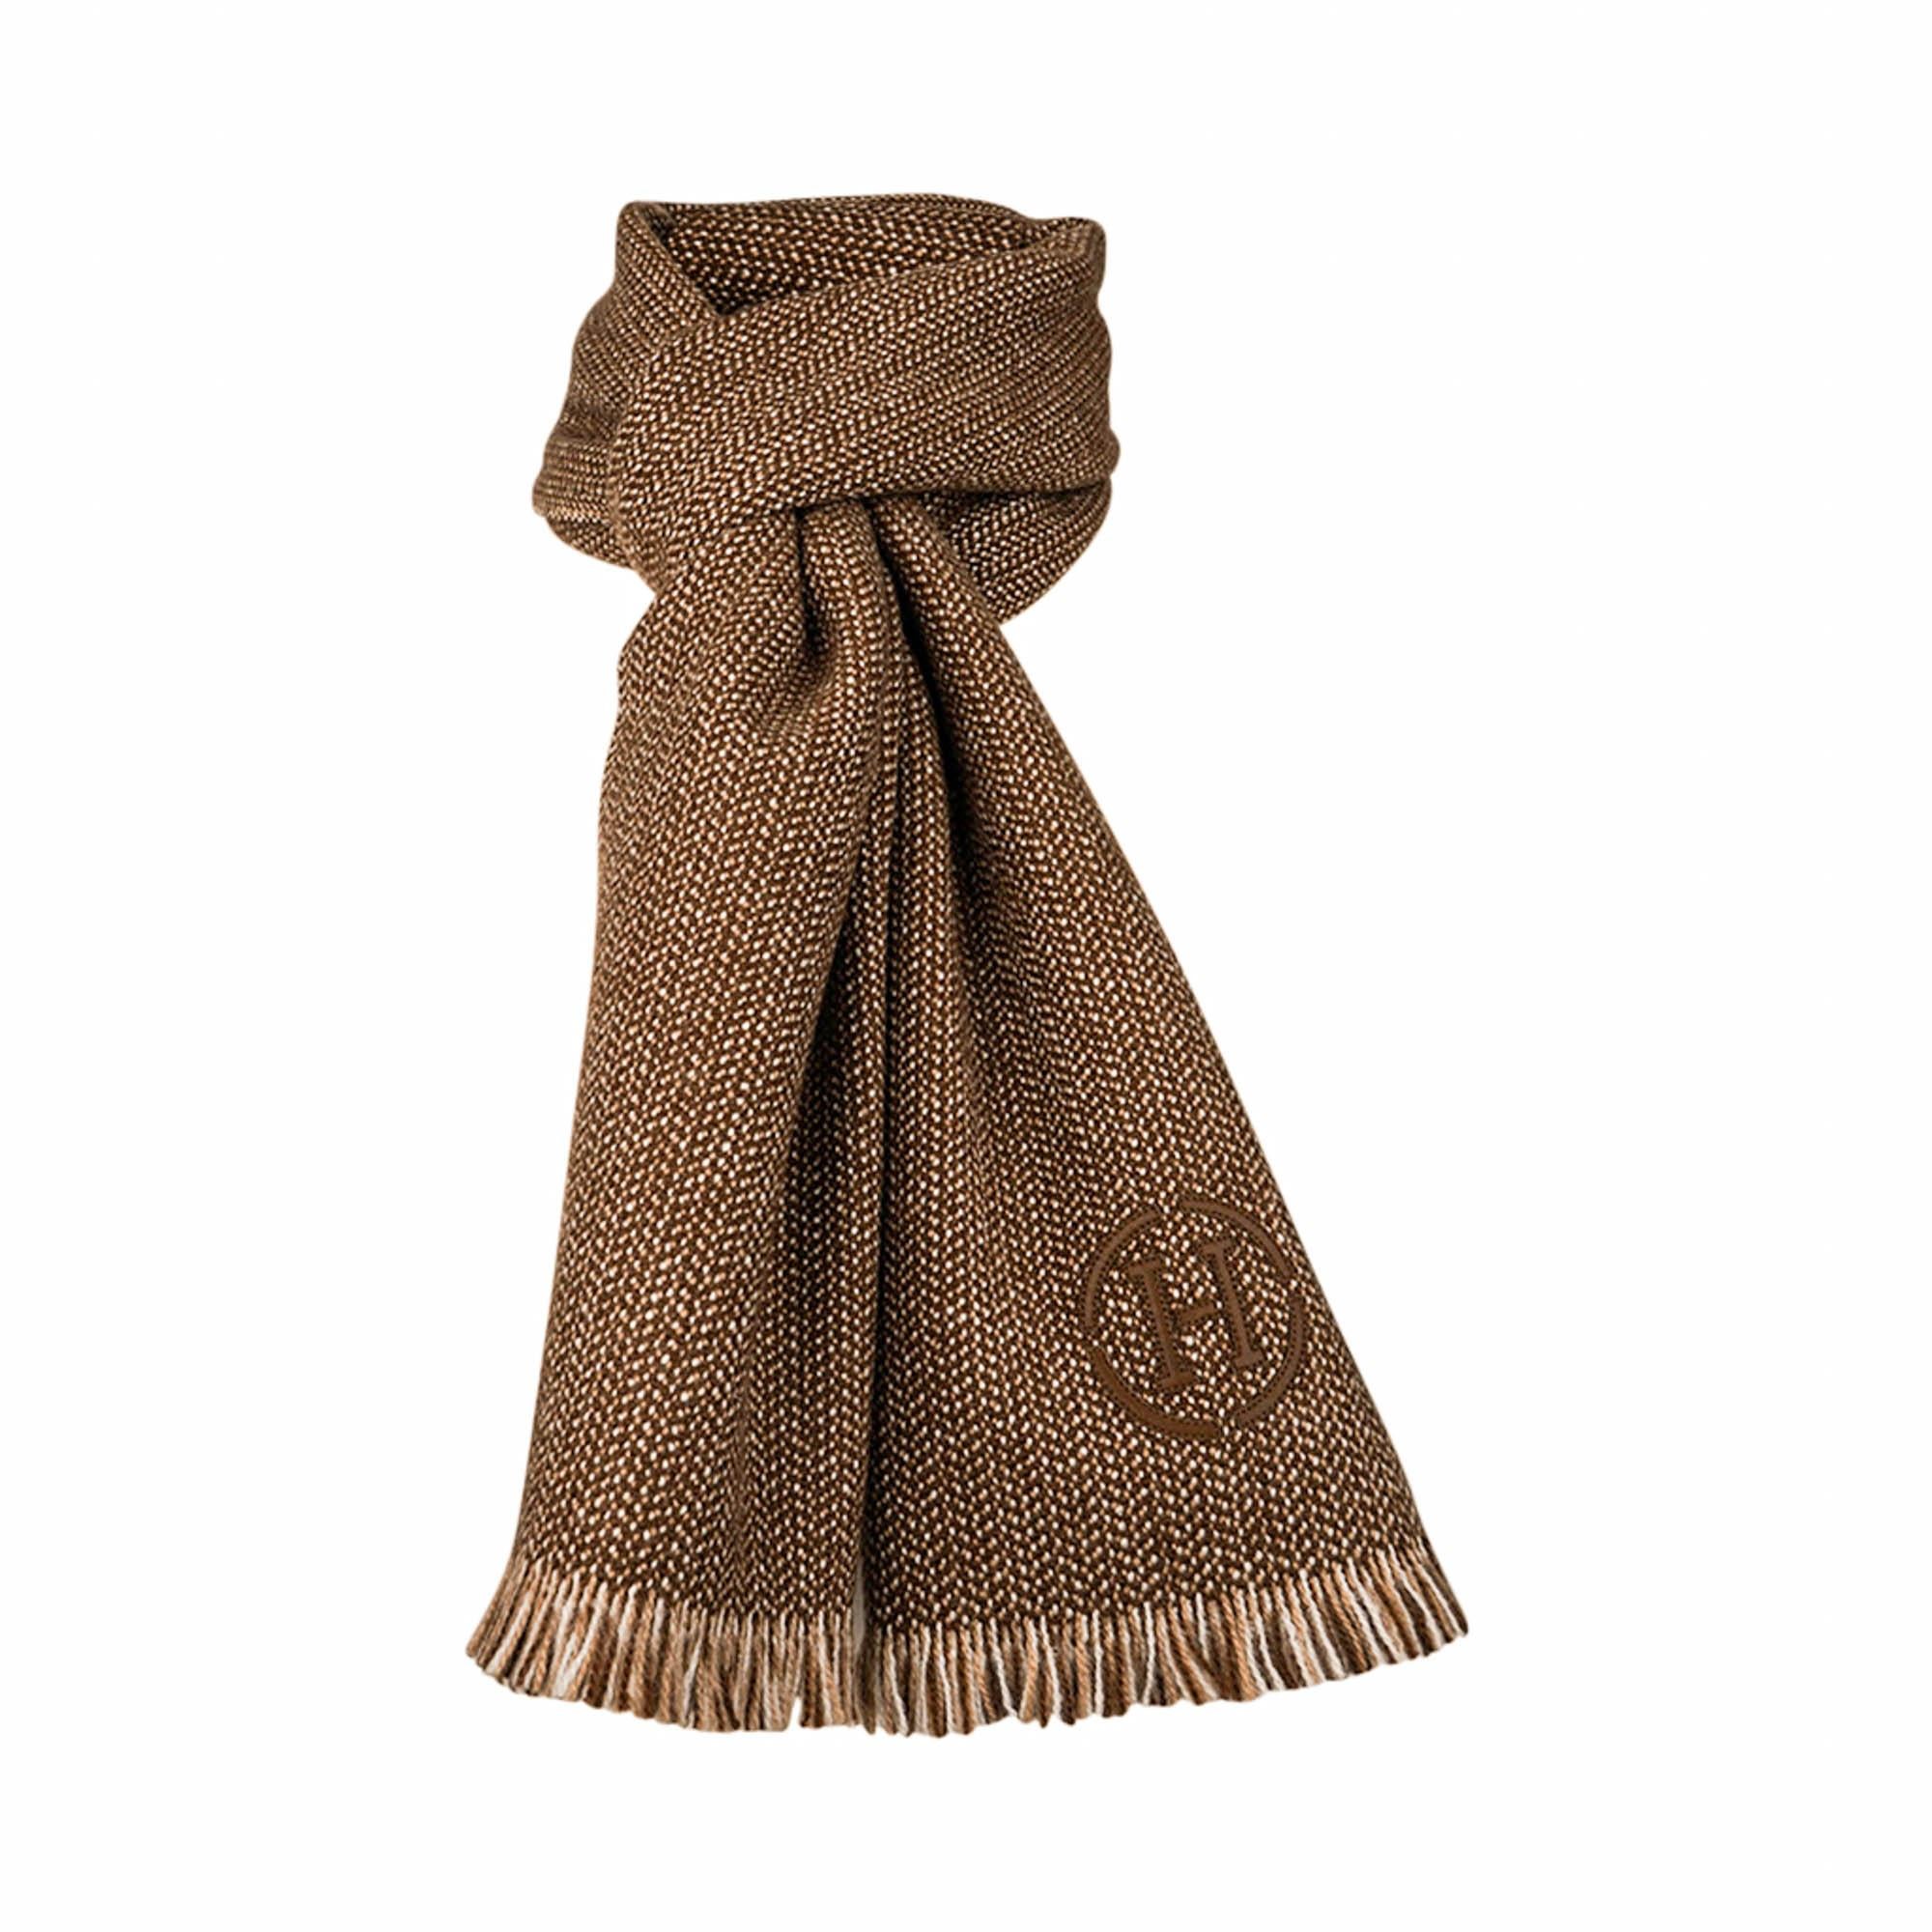 Mightychic offer an Hermes Granite Cashmere fringed muffler featured in Caramel, Camel and Ecru.
Embroidered logo Hermes Paris.
Tricolor weave gives a granite effect.
Muffler has a short fringe.
Can be worn as a muffler or neck scarf.
Made in